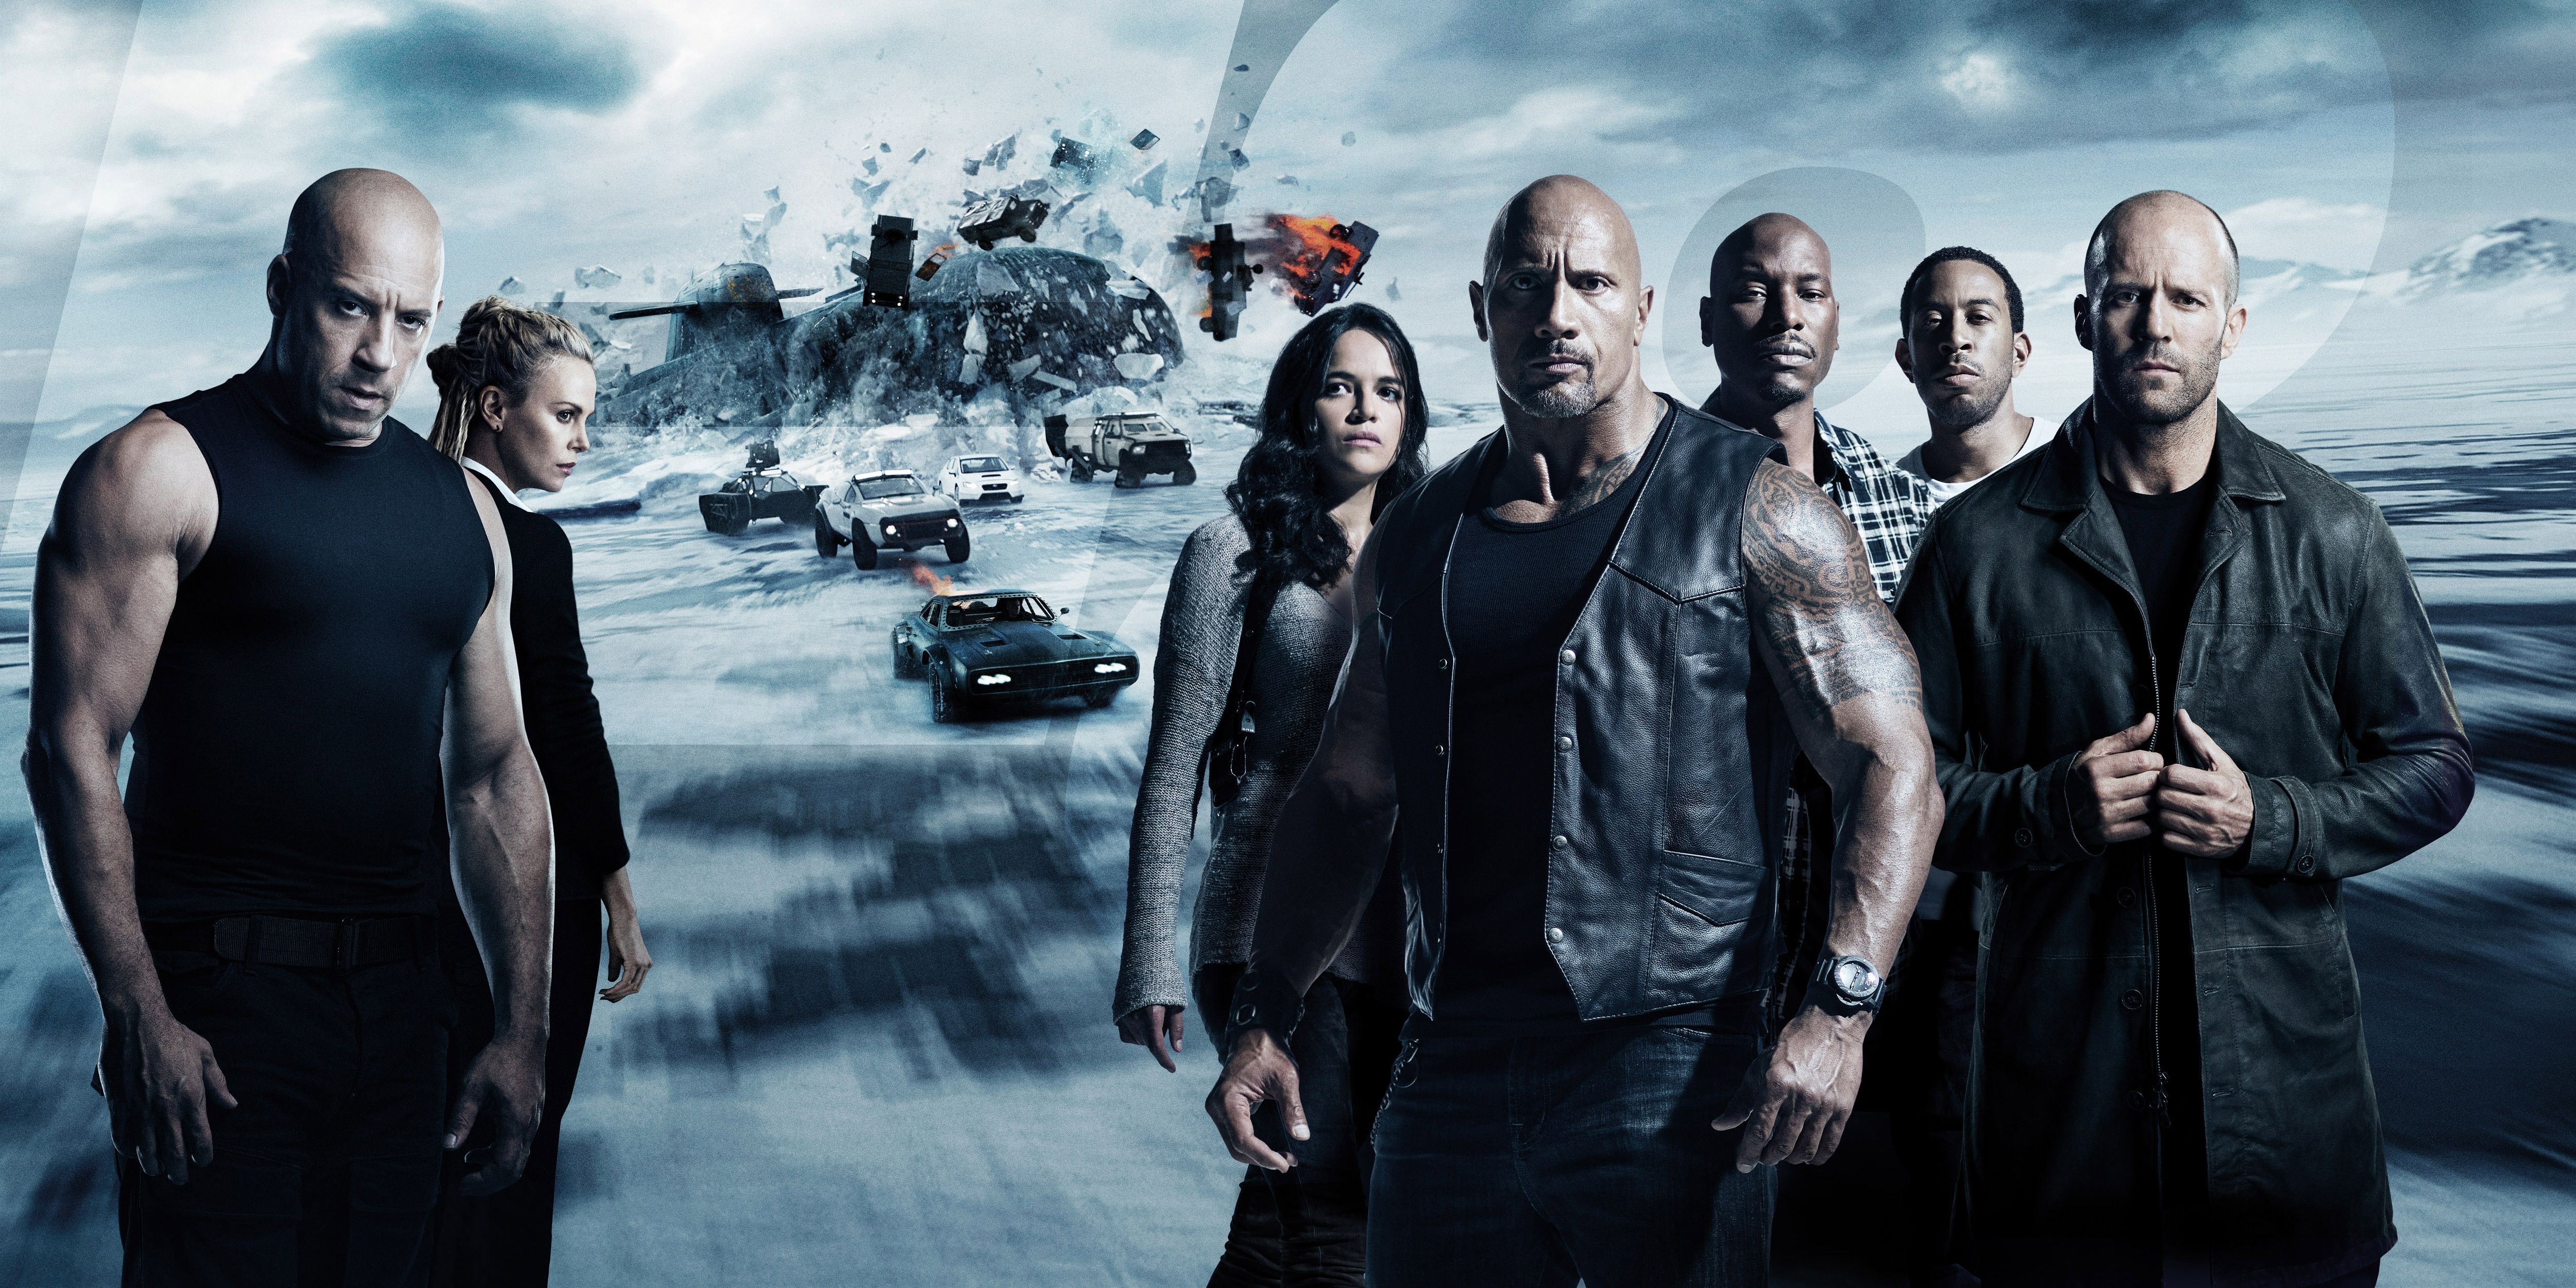 the fast and furious cast featured